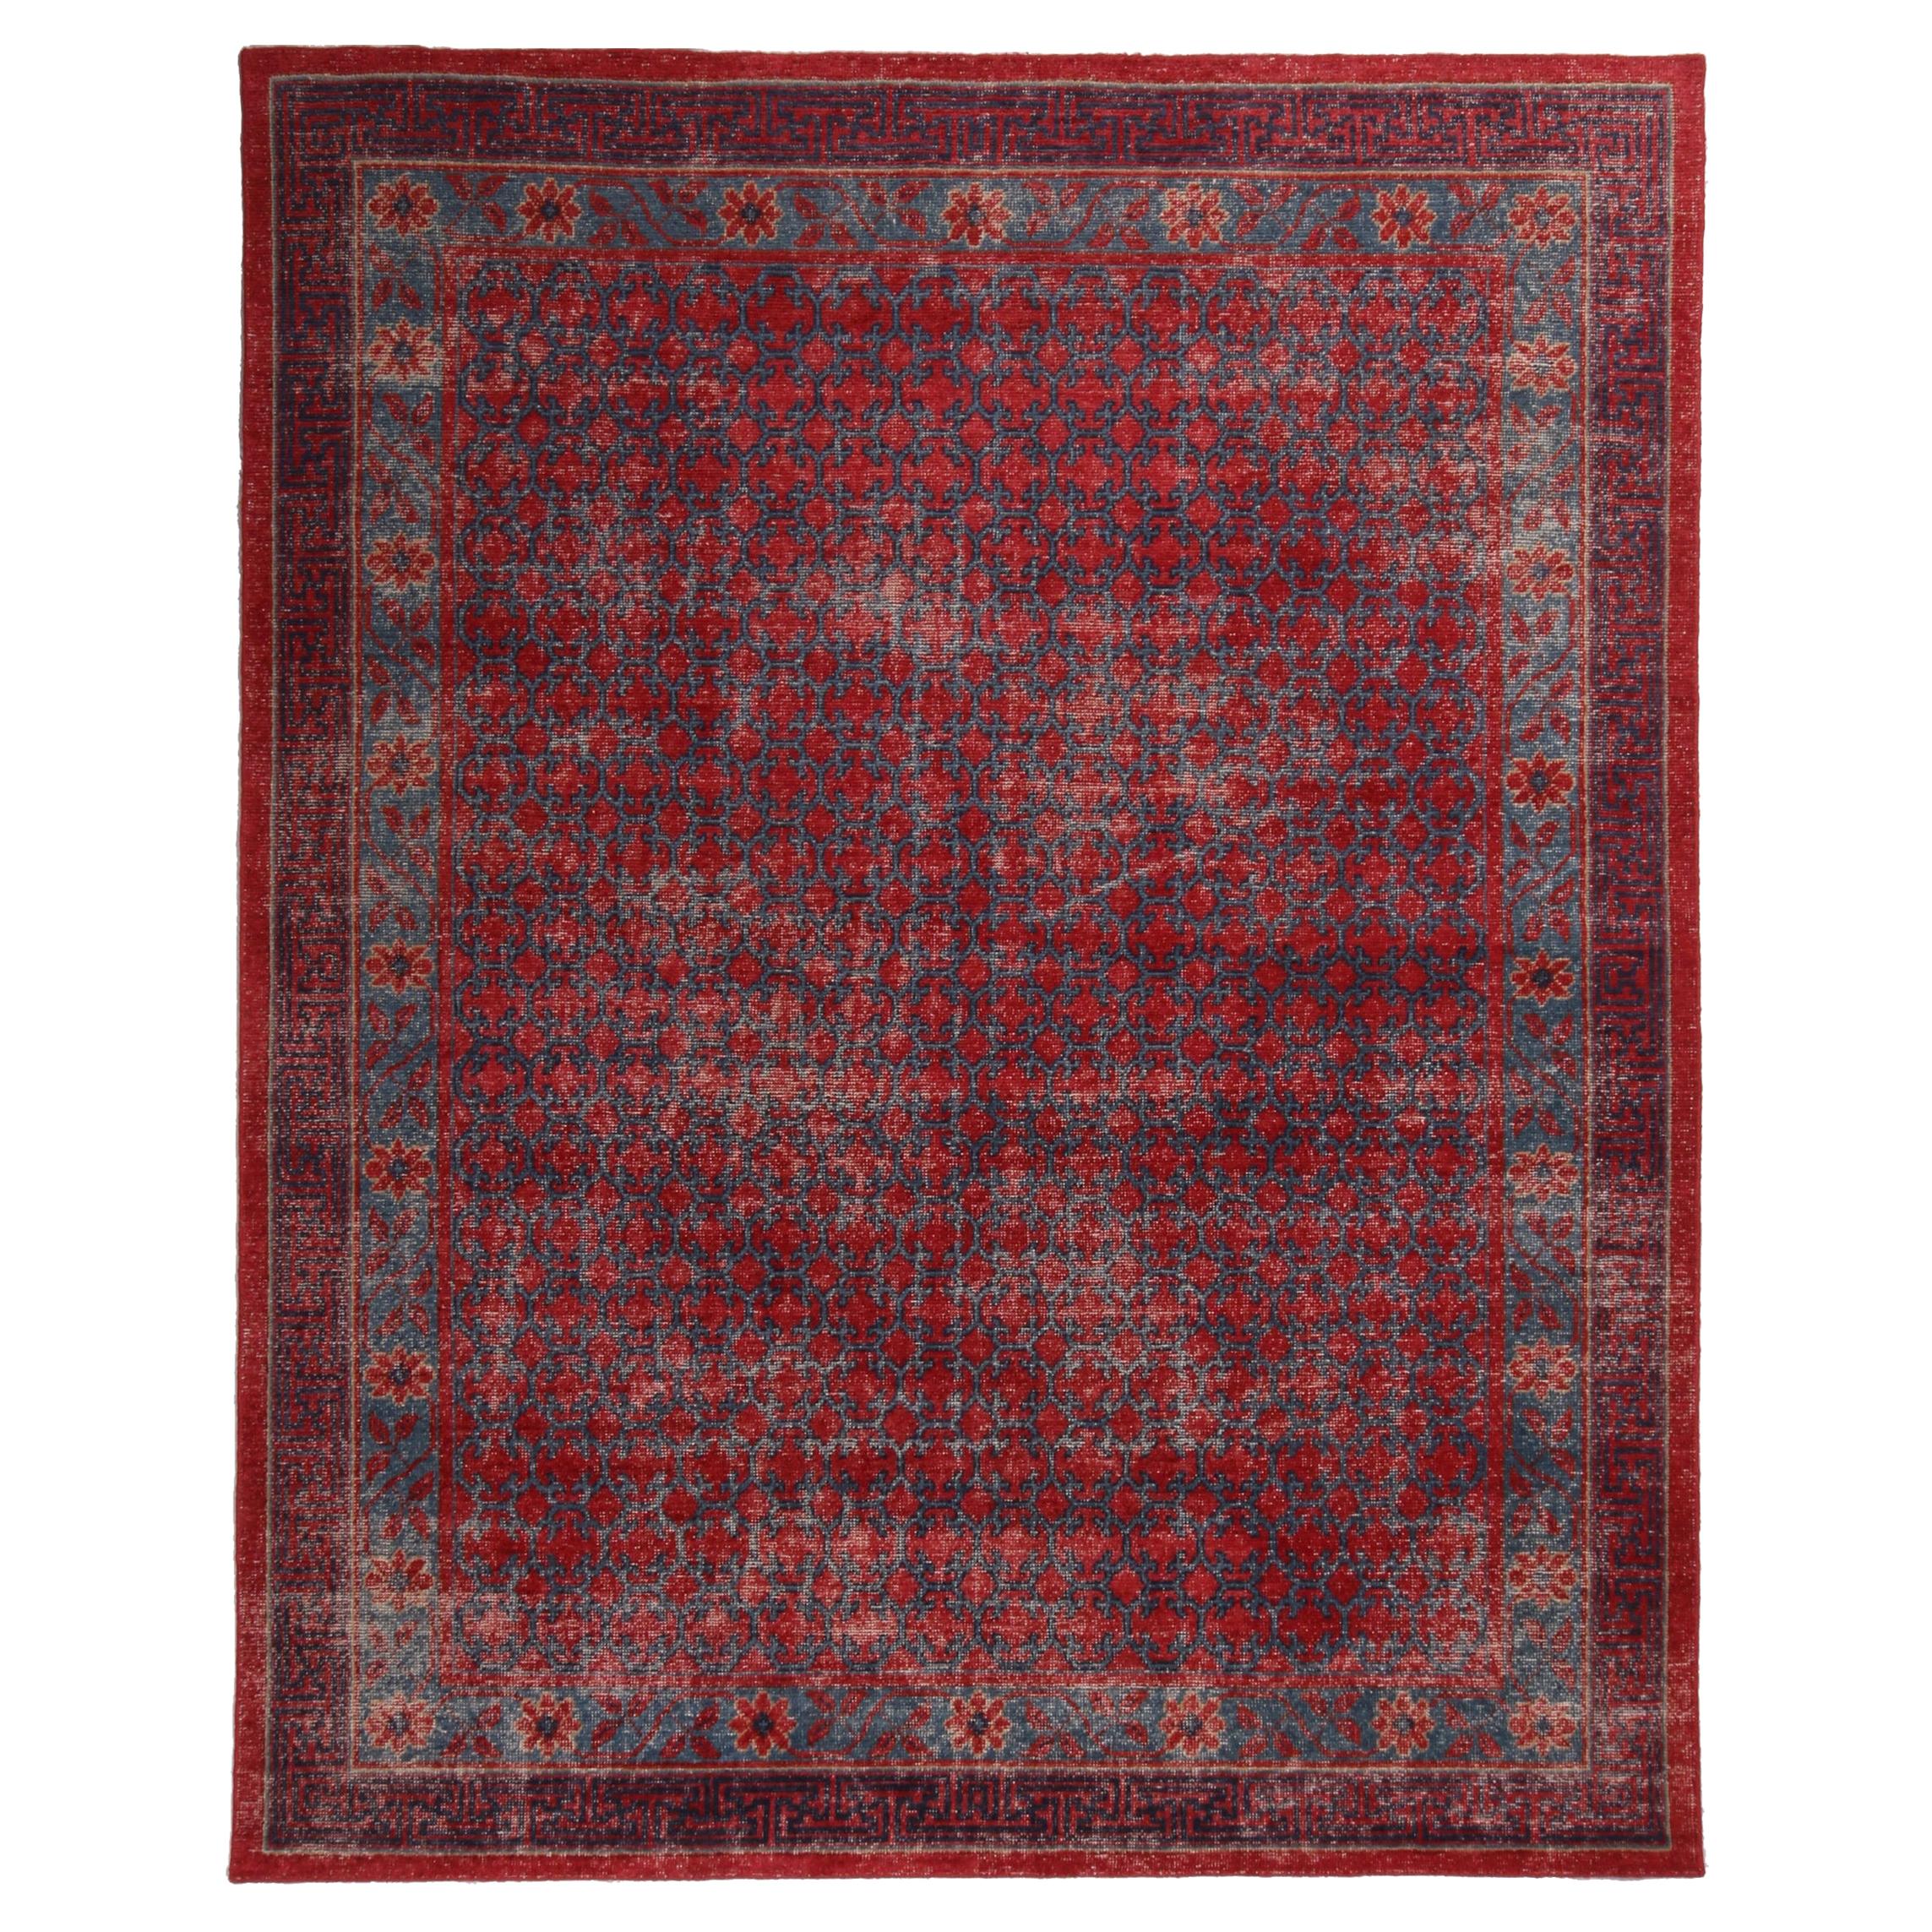 Rug & Kilim's Khotan Velvet Red and Blue Wool Rug from the Homage Collection